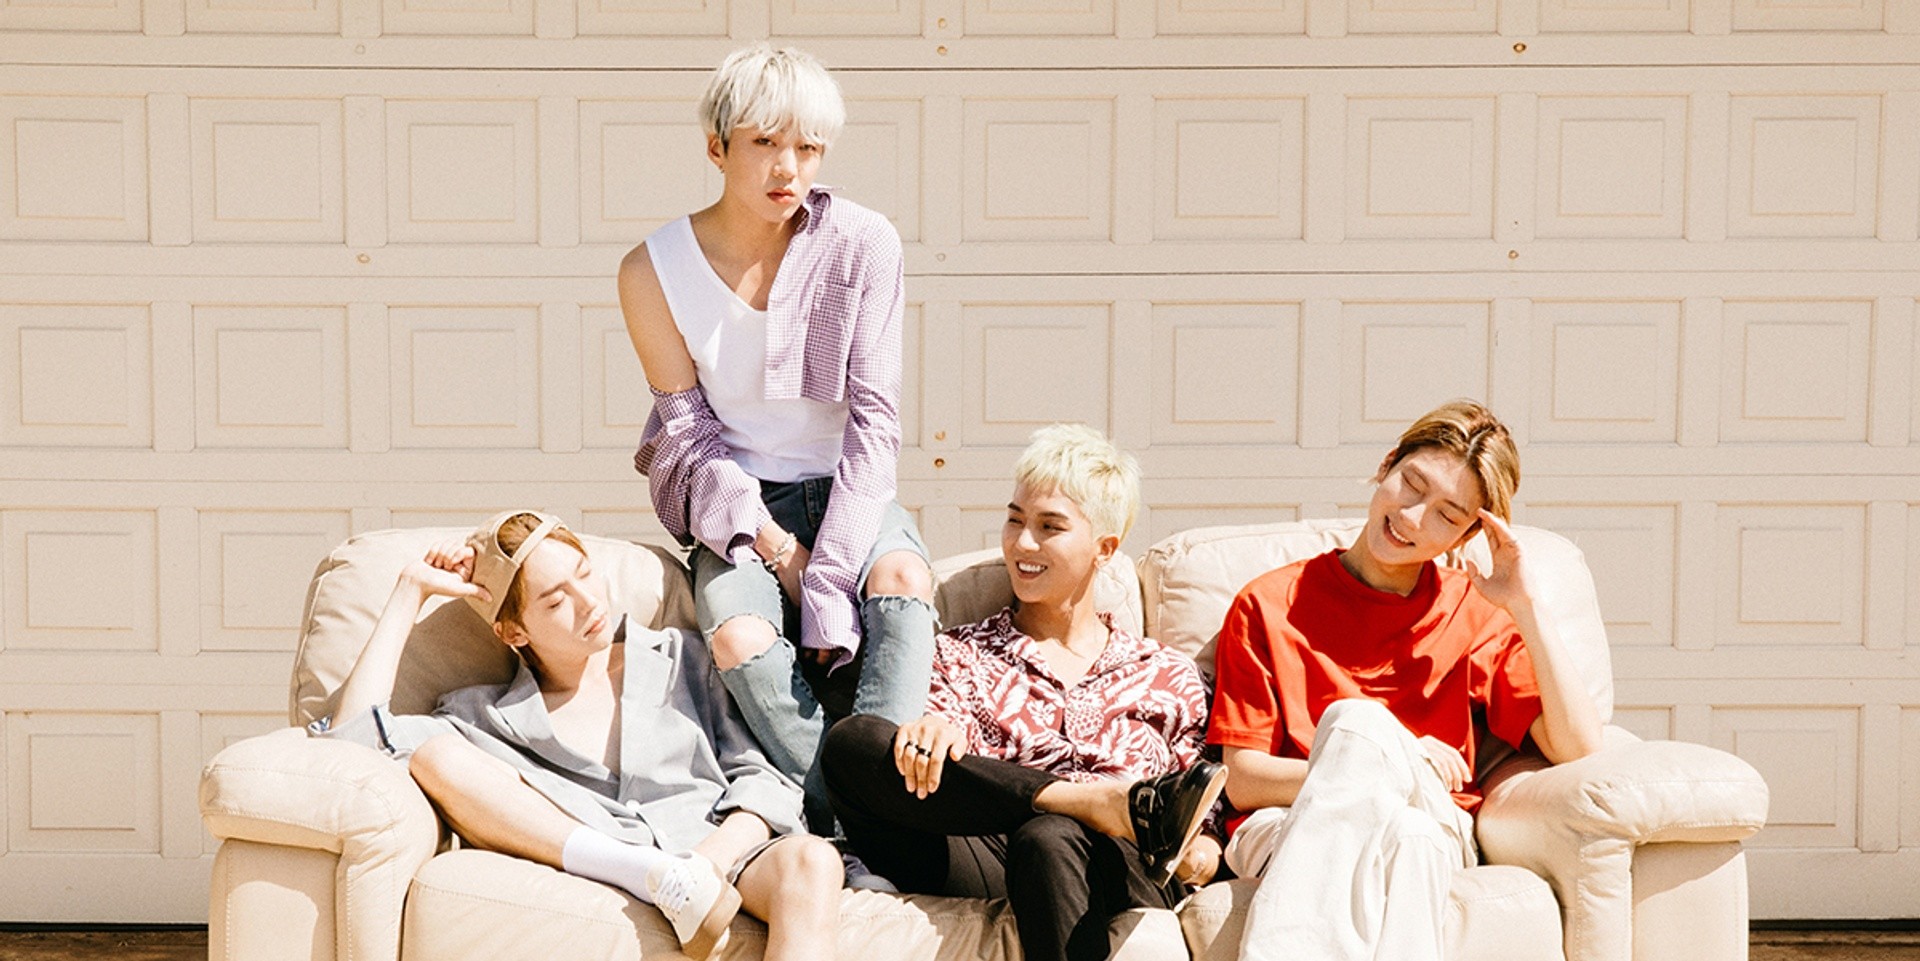 Ticketing details, date and venue announced for WINNER 2018 EVERYWHERE TOUR stop in Singapore